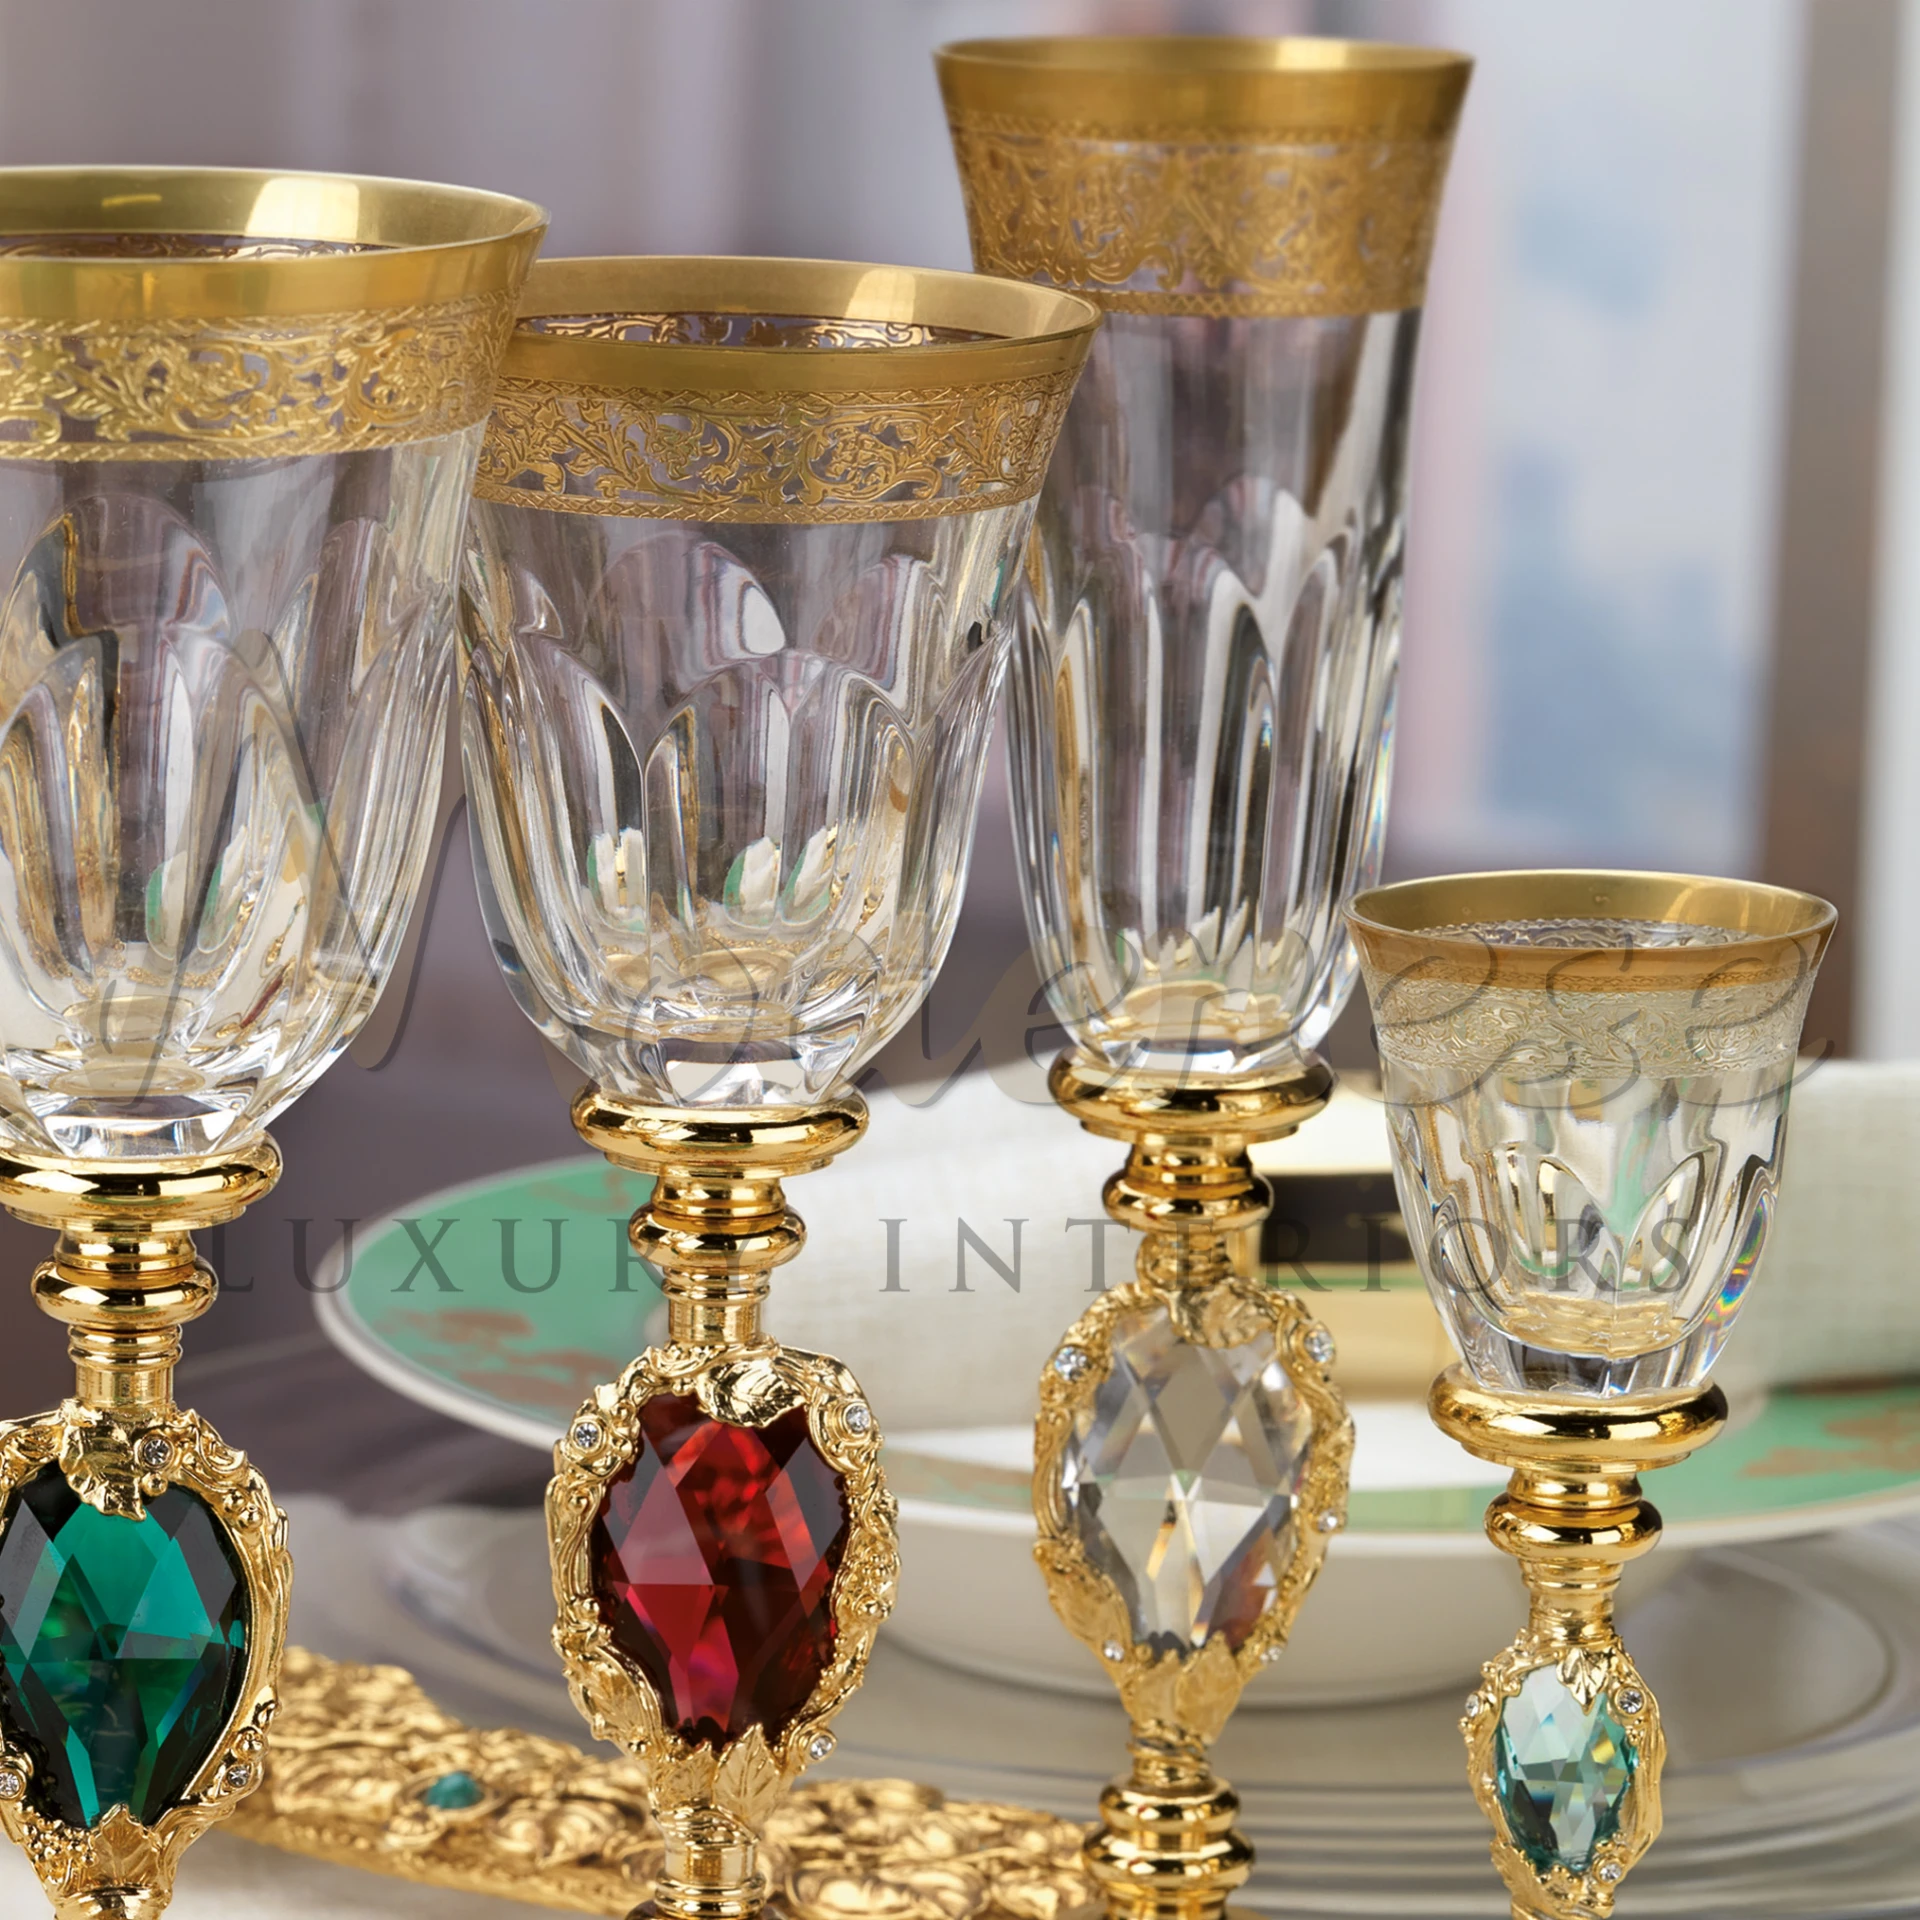 Luxurious different crystal glasses with golden rims and bases, embedded with colorful gemstones